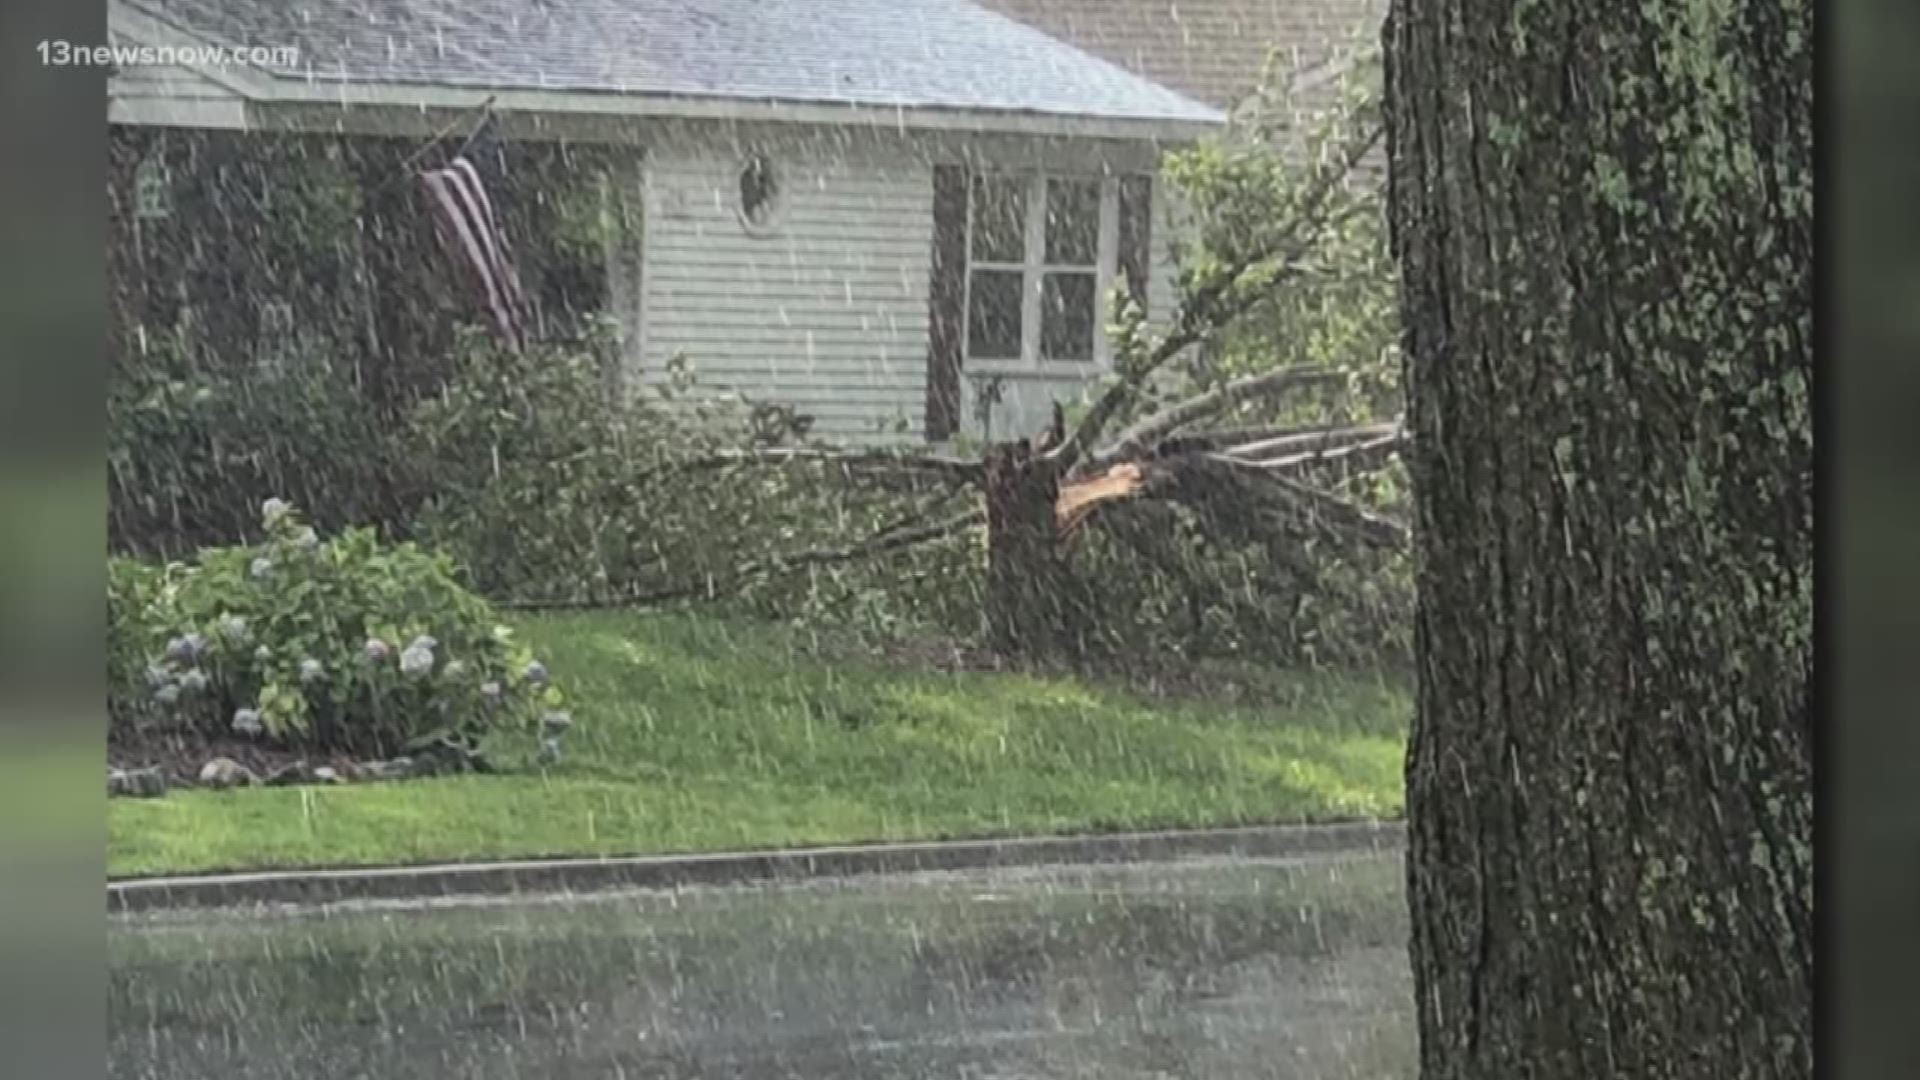 Pop up storms that roared through Hampton Roads Monday brought down trees and limbs in Poquoson, but fortunately, there was no major damage.